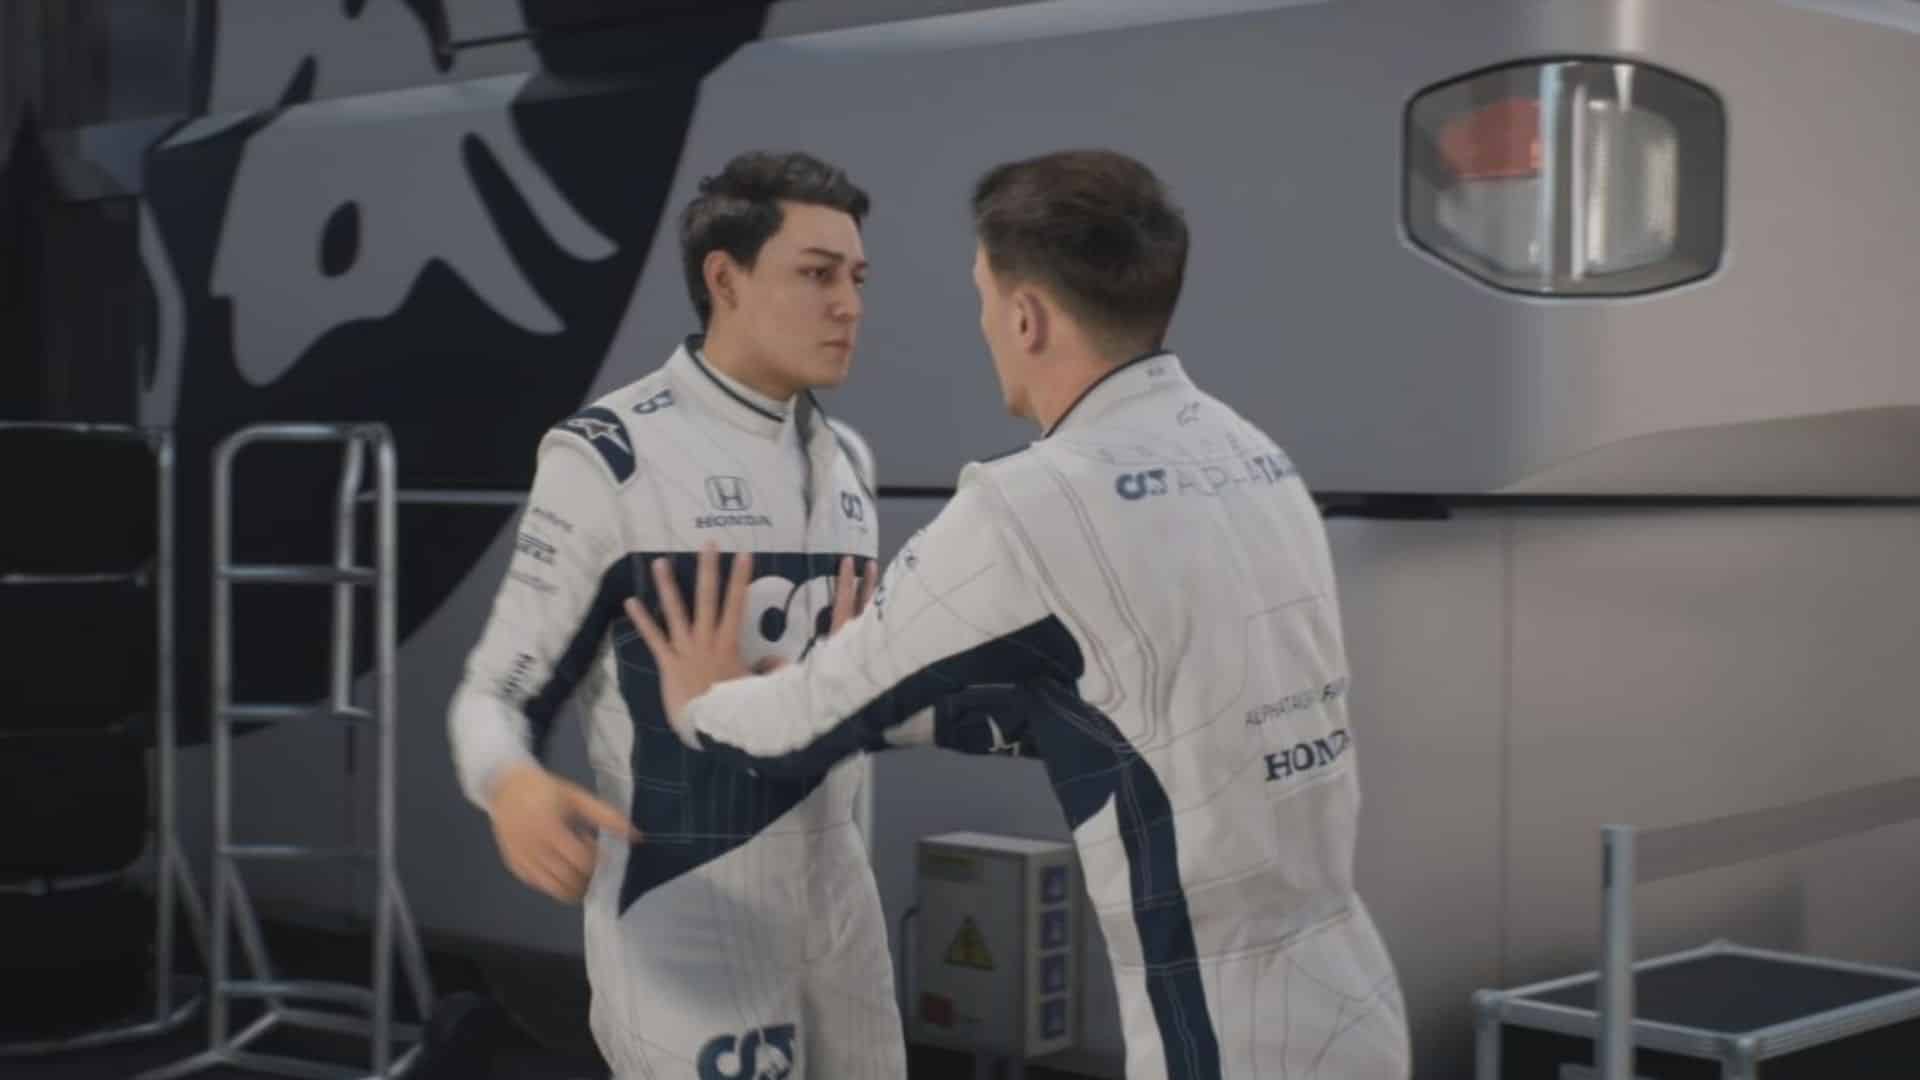 f1 drivers shoving each other in Braking Point